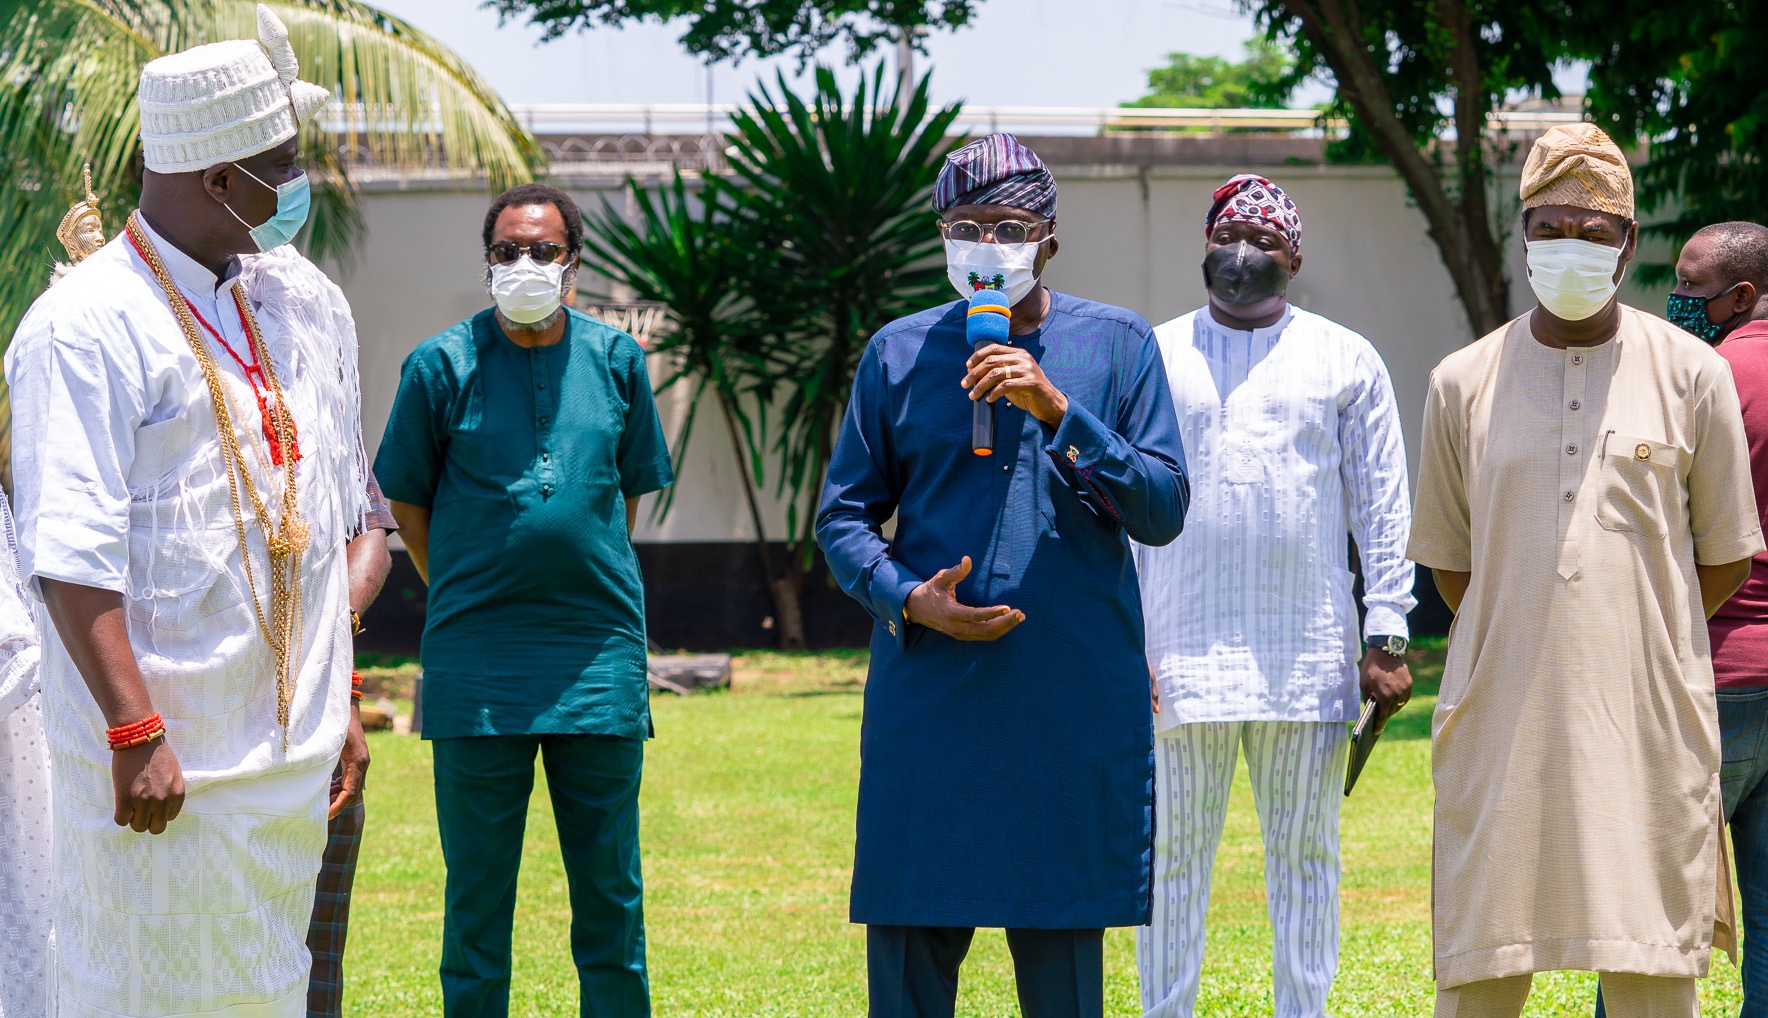 L-R: Ooni of Ife, Oba Adeyeye Enitan Ogunwusi, Ojaja II; Lagos State Governor, Mr. Babajide Sanwo-Olu and the Deputy Governor, Dr. Obafemi Hamzat during the donation of Motorized Modular Fumigators to the Lagos State Government by the Ooni of Ife, to fight against the COVID-19 pandemic in the State, at Lagos House, Marina, on Tuesday, April 28, 2020.